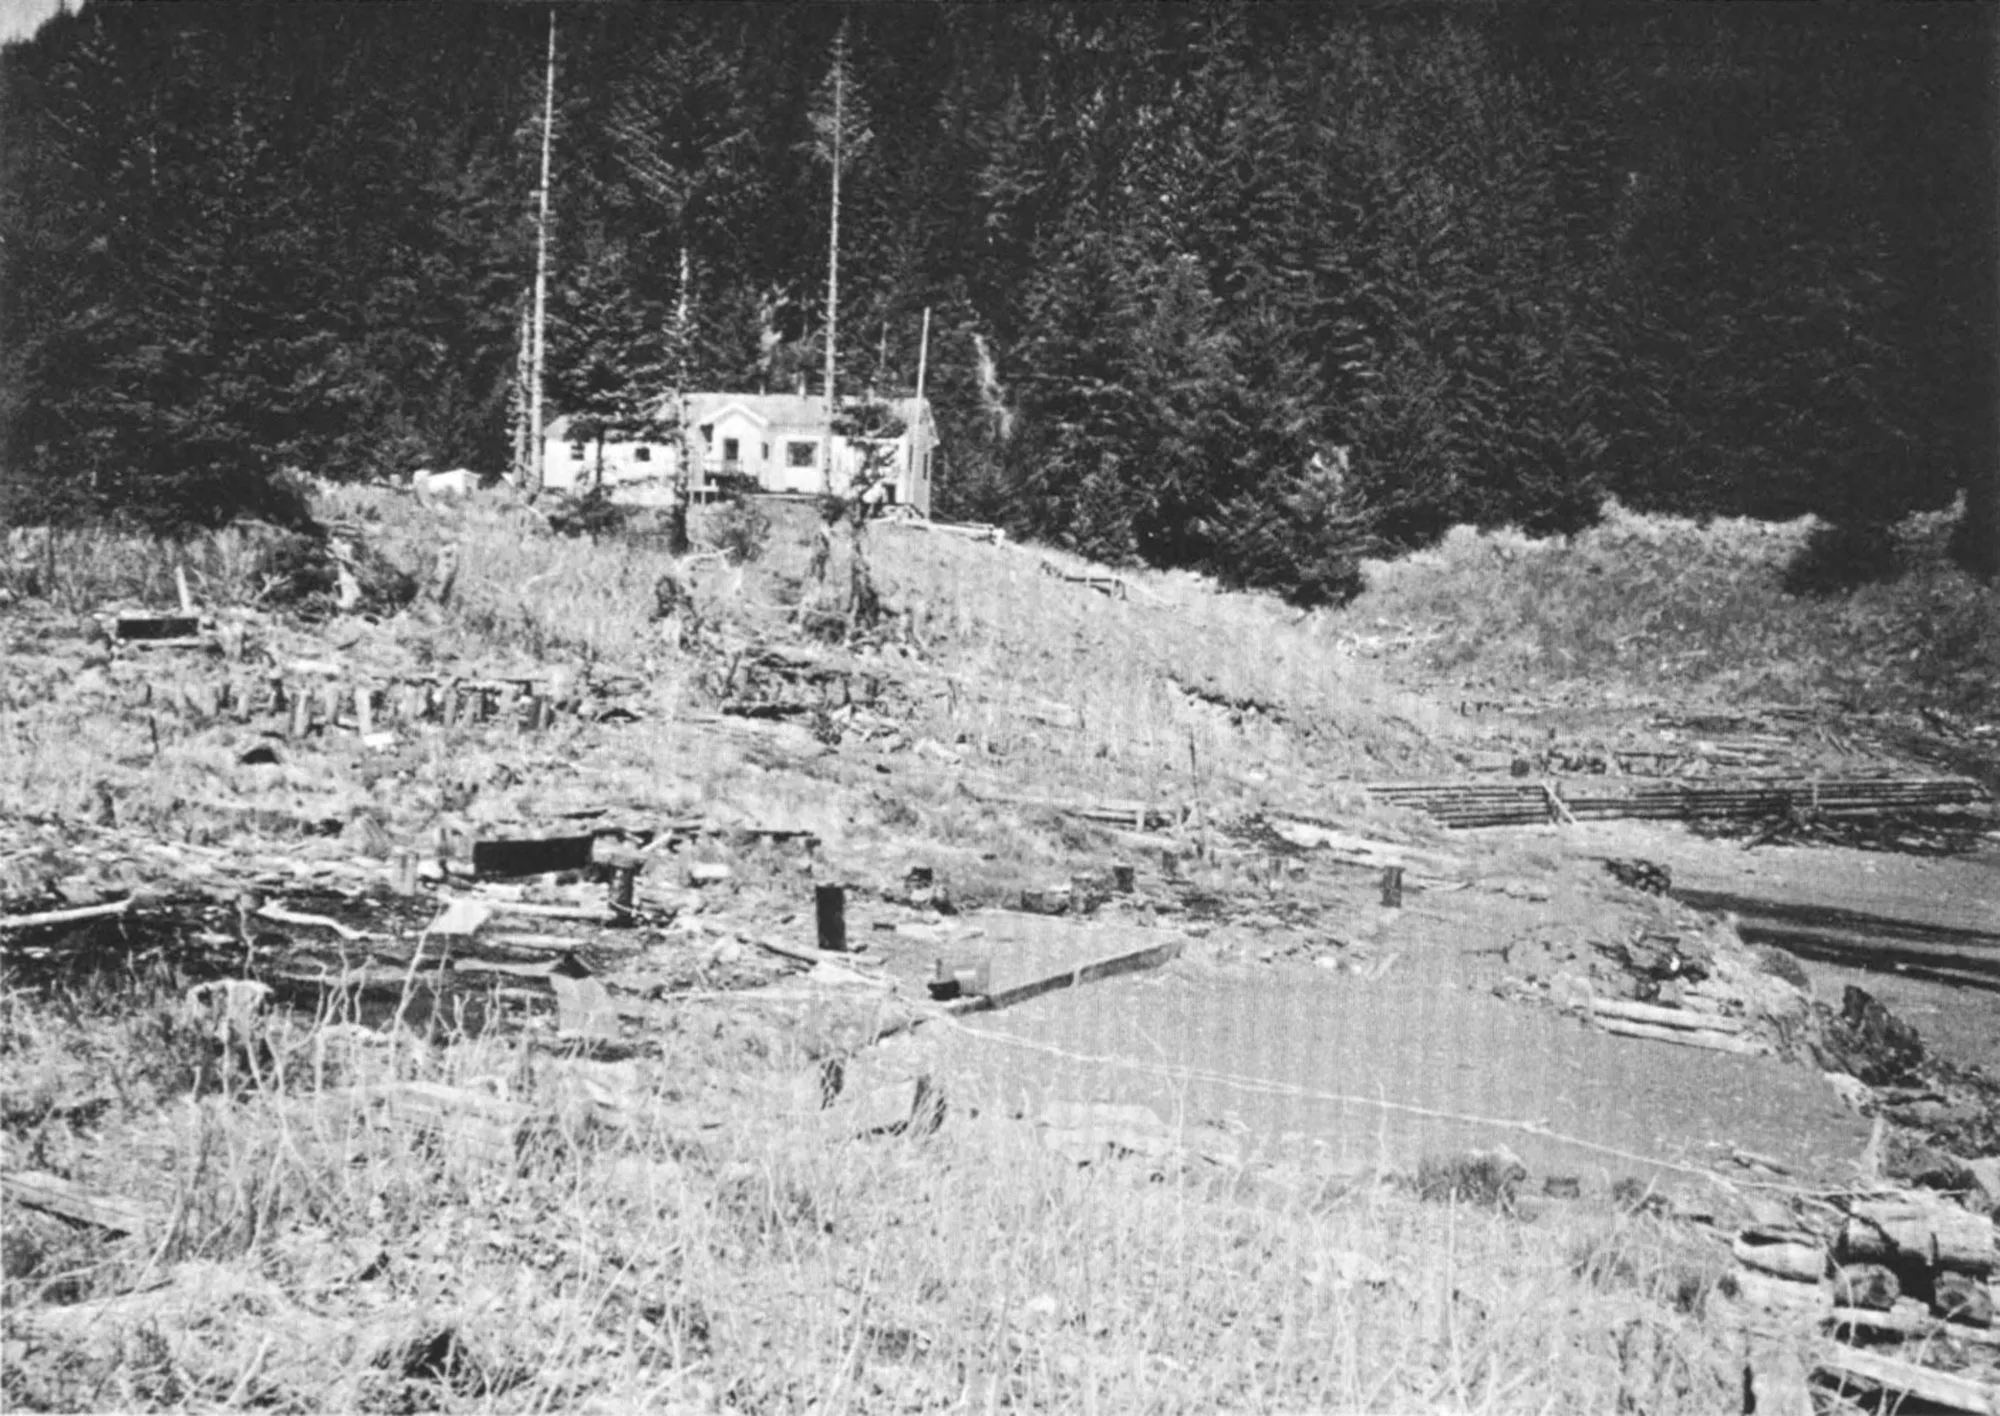 George Plafker took this photo of Chenega Bay, Alaska, in 1964 following the great earthquake. A schoolhouse survived the earthquake and tsunami that followed. The tsunami destroyed houses lower than the schoolhouse. George Plafker photo.